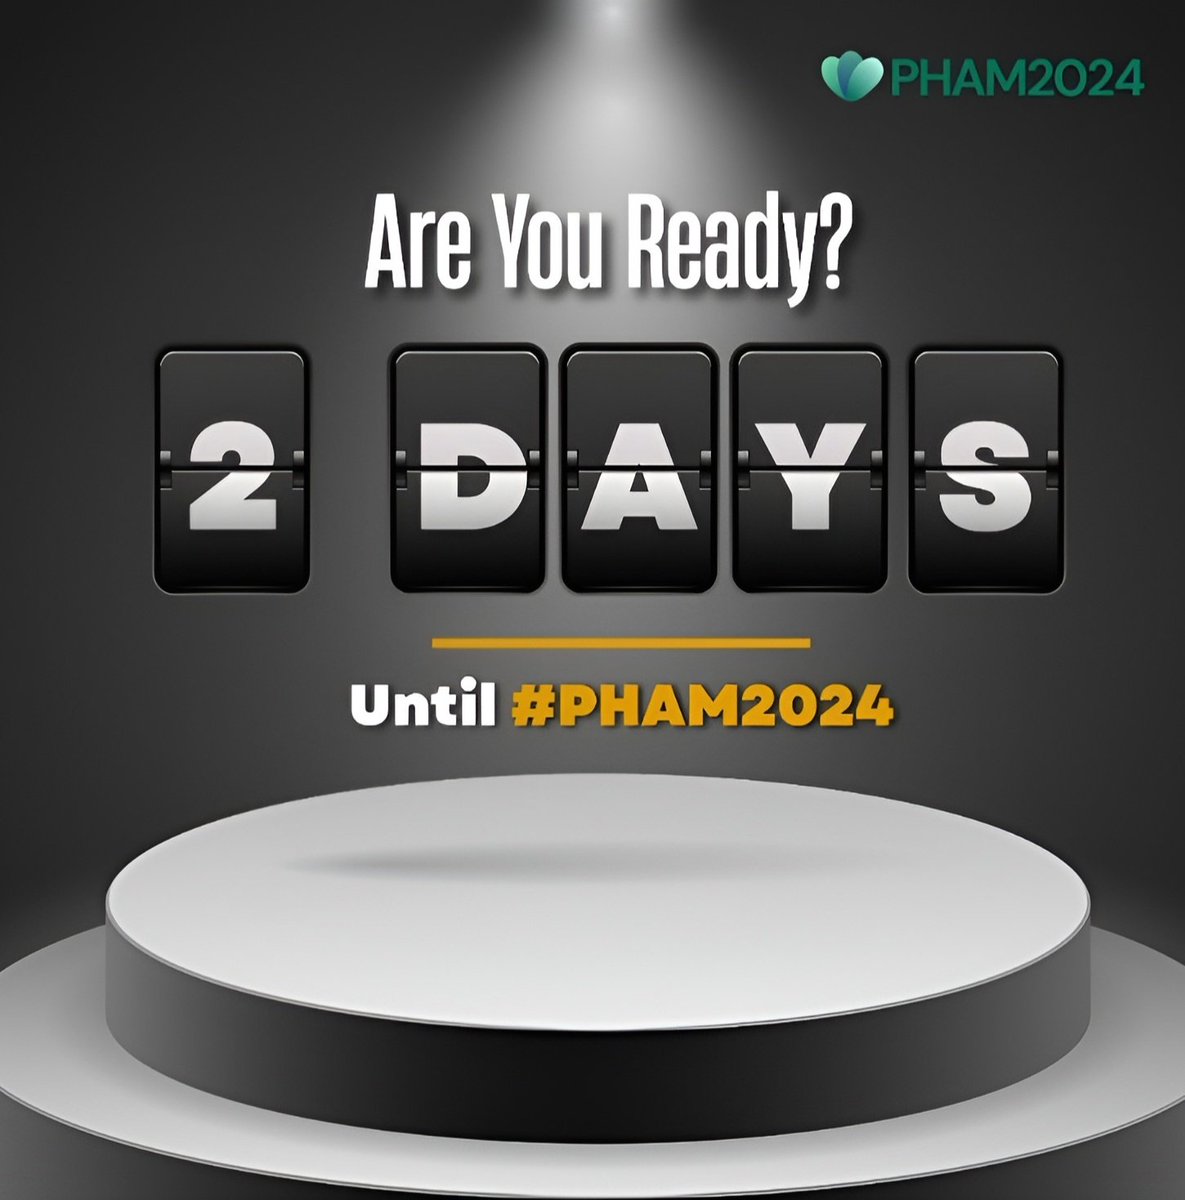 2 Days Until #PHAM2024! The countdown is on for a week packed with groundbreaking ideas and crucial conversations on planetary health. Follow our social media for exclusive updates as we ignite change together! #PlanetaryHealth #Sustainability #FromEvidenceToAction